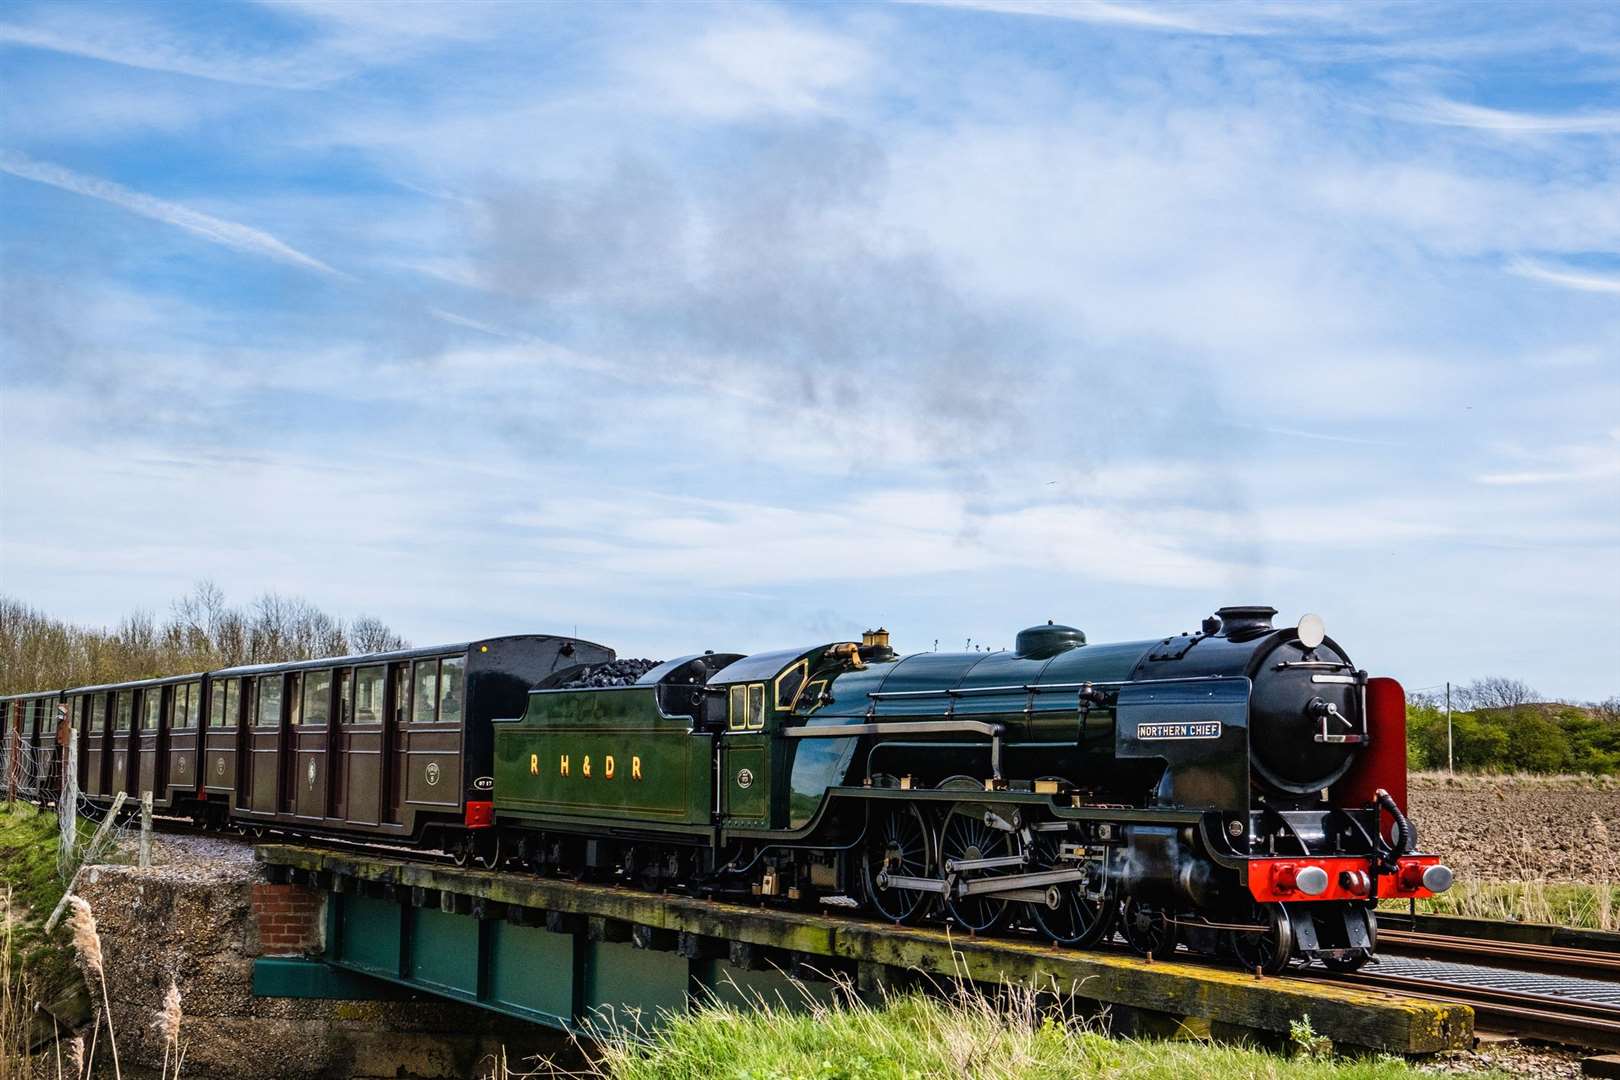 The railway has a large fleet of one third size steam and diesel locomotives